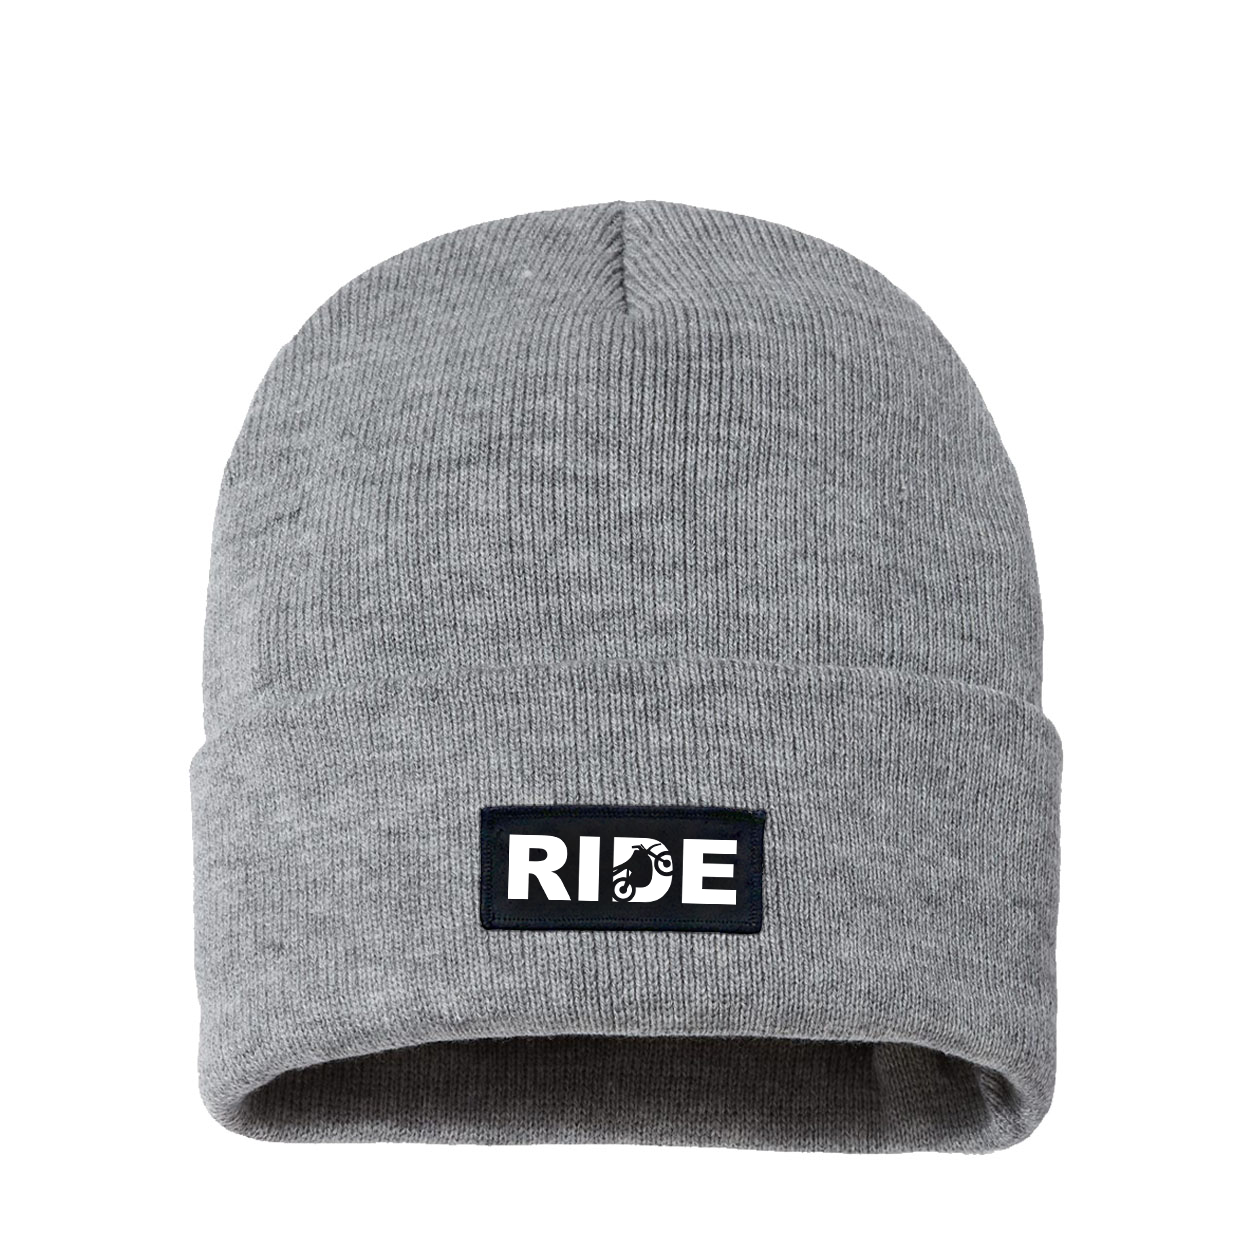 Ride Moto Logo Night Out Woven Patch Sherpa Lined Cuffed Beanie Heather Gray (White Logo)